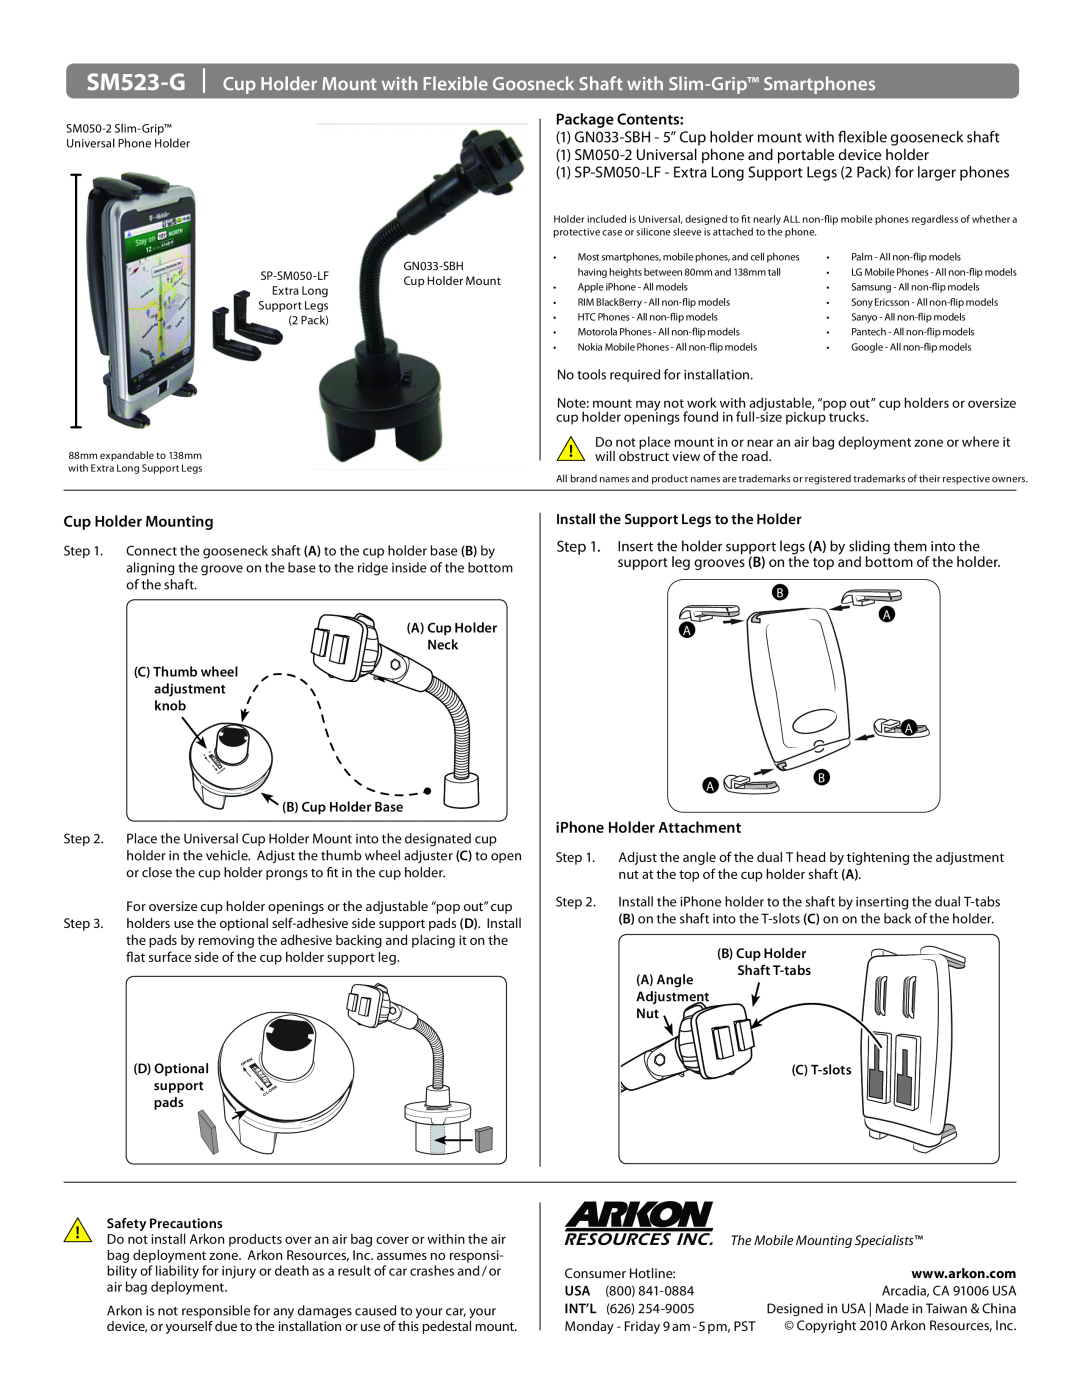 Avaya SM523-G manual Package Contents, Cup Holder Mounting, iPhone Holder Attachment, The Mobile Mounting Specialists 